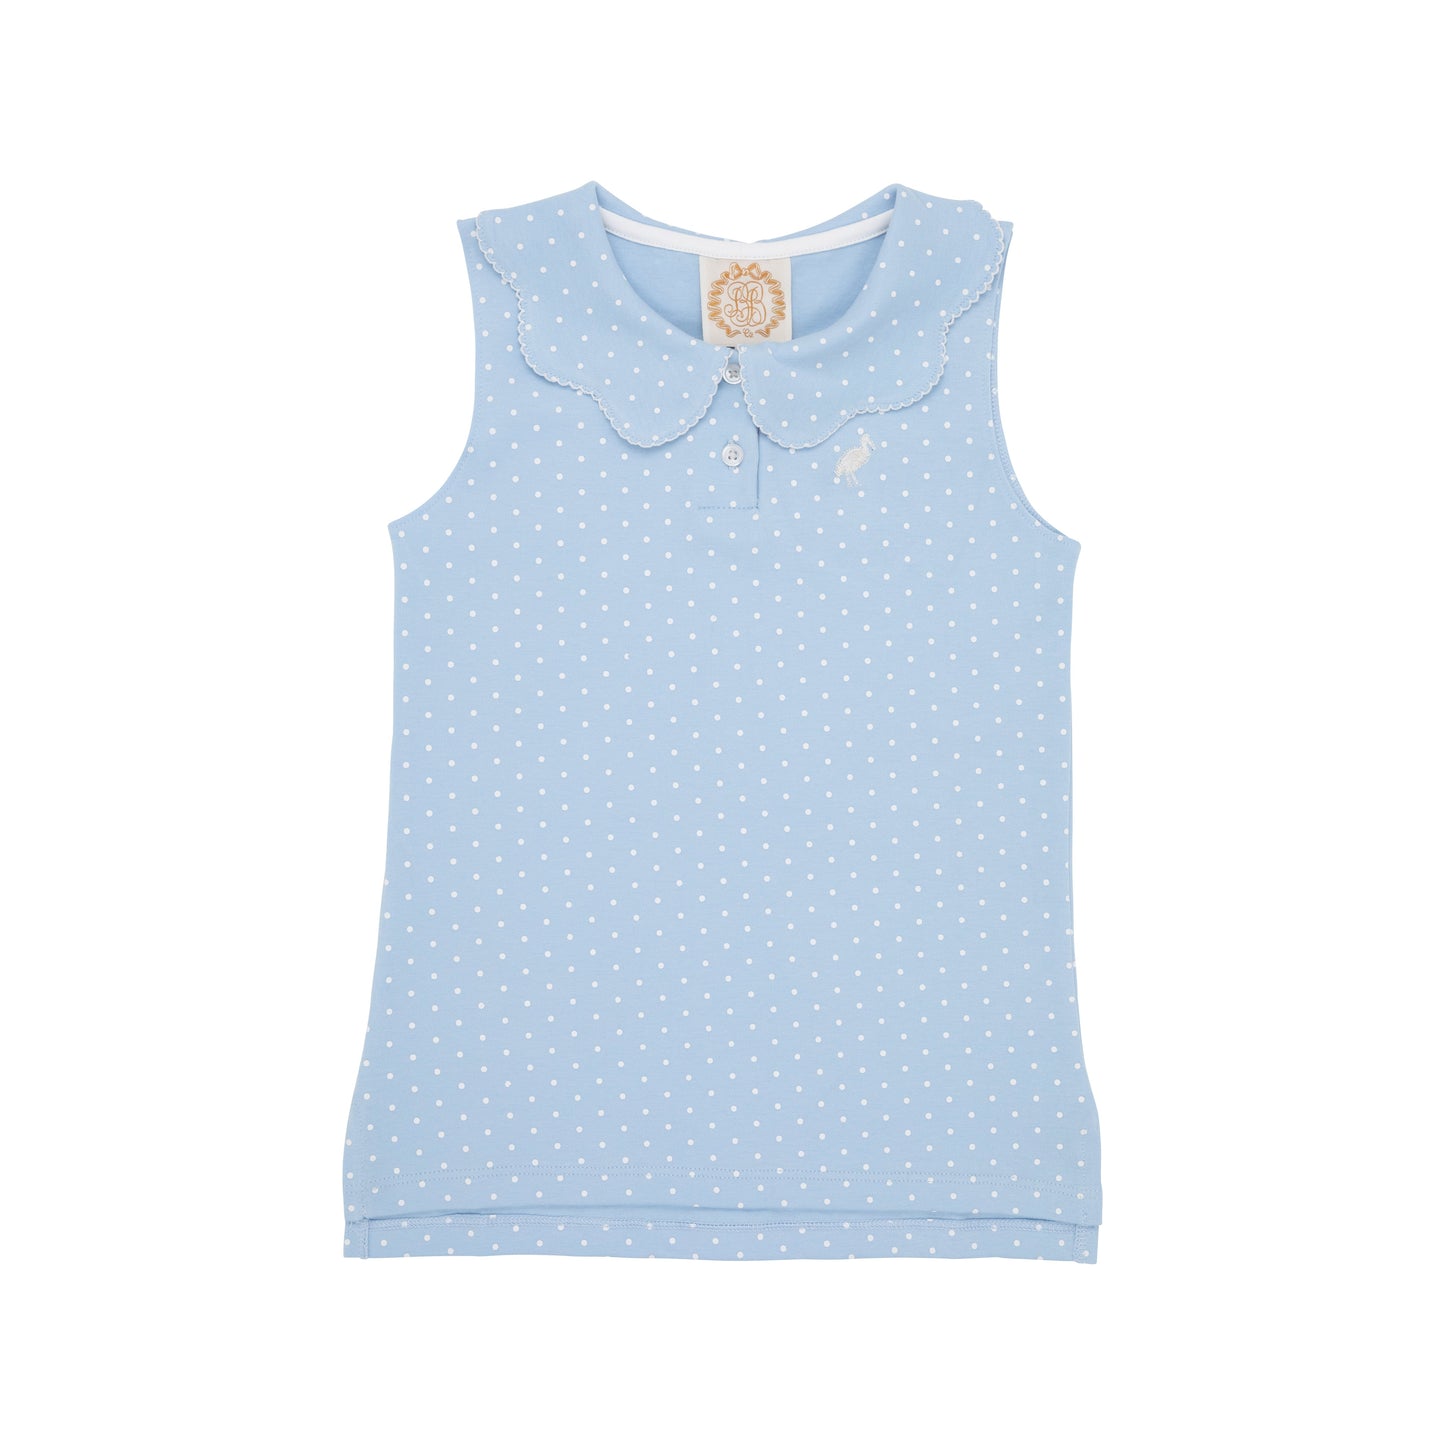 The Beaufort Bonnet - Paige's Playful Polo Beale Street Blue & Worth Avenue White Micro Dot Regular price